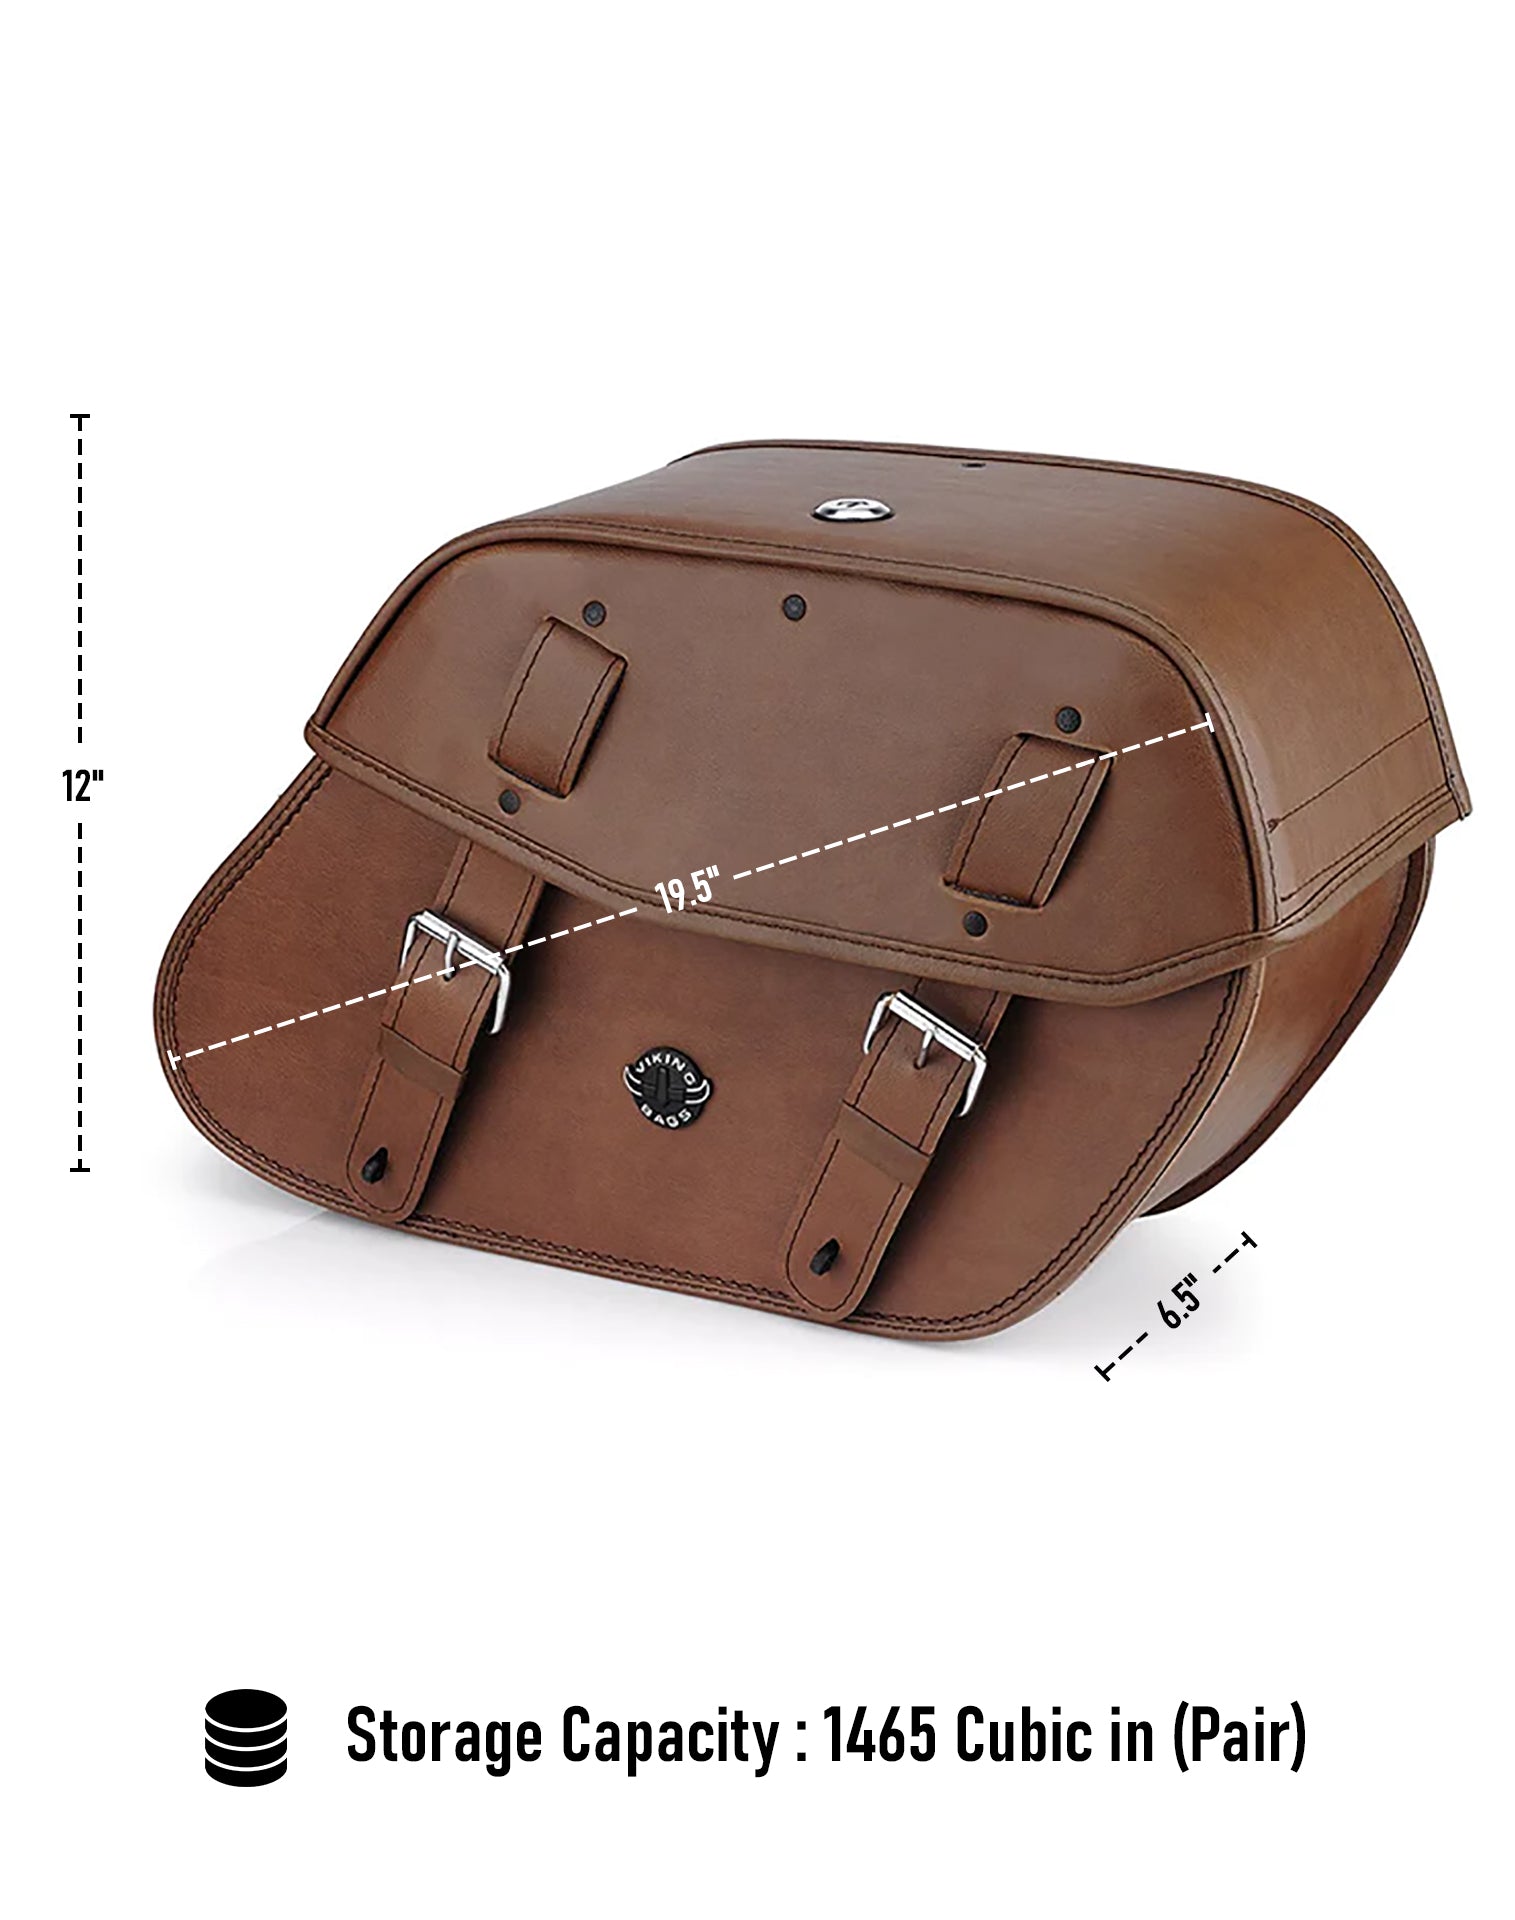 Viking Odin Brown Large Honda Vtx 1300 C Leather Motorcycle Saddlebags Can Store Your Ridings Gears